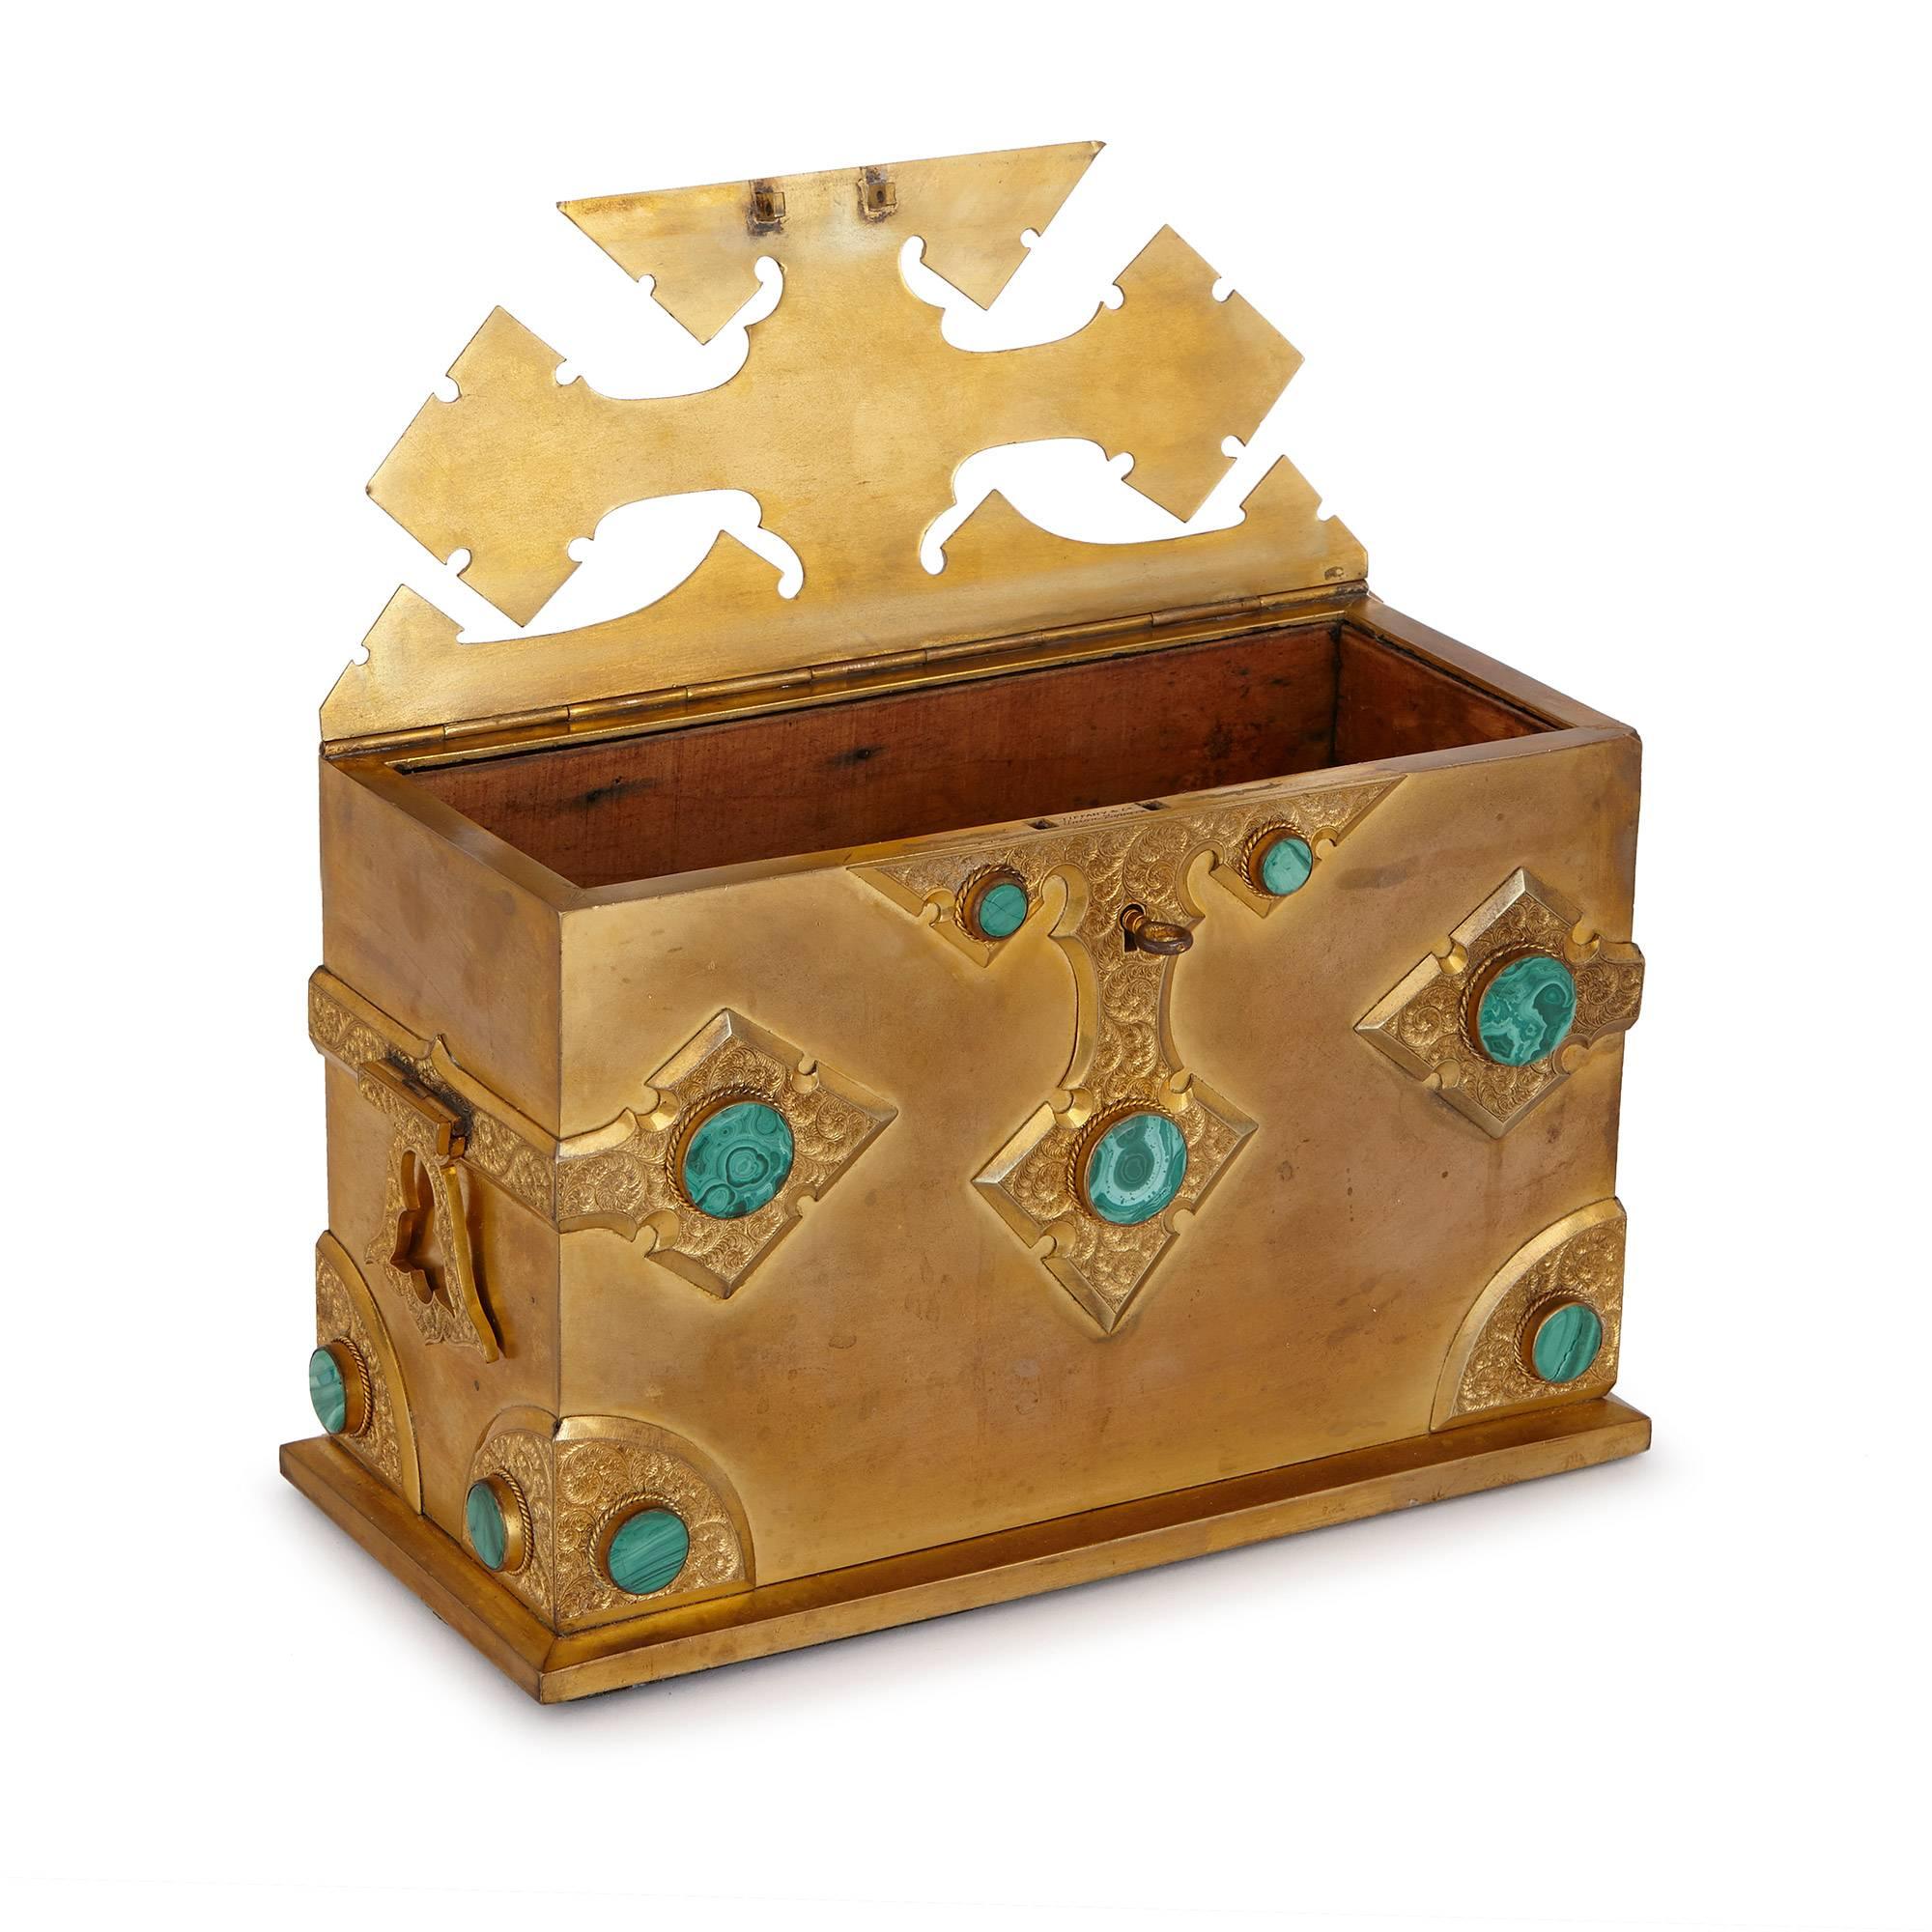 Of rectangular form, featuring an unusual cut-away lid and decorated with Gothic style detailing set with circular malachite discs, inscribed 'Tiffany & Co, Union Square'.

With green malachite detailing beautifully offset by golden ormolu, this